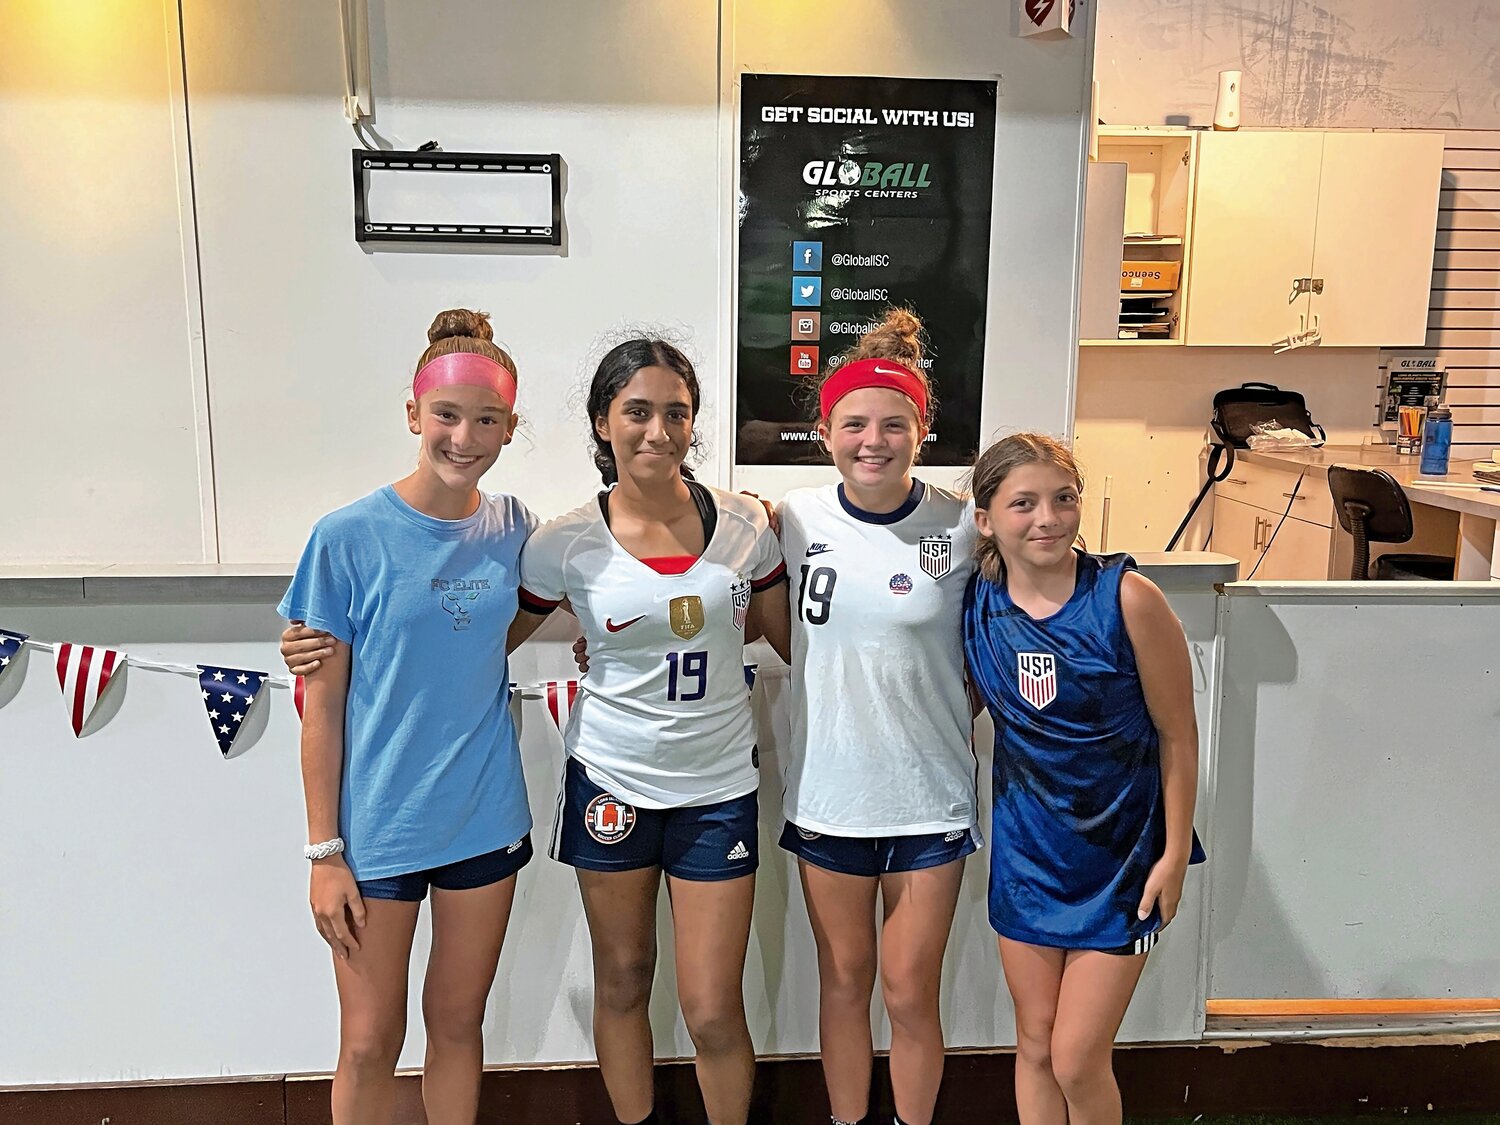 Long Island Soccer Club stars Julia, Kashvi, Kenley and Stella said they had a great time at the World Cup watch party hosted by Nassau County Executive Bruce Blakeman at the Globall Sports Center.